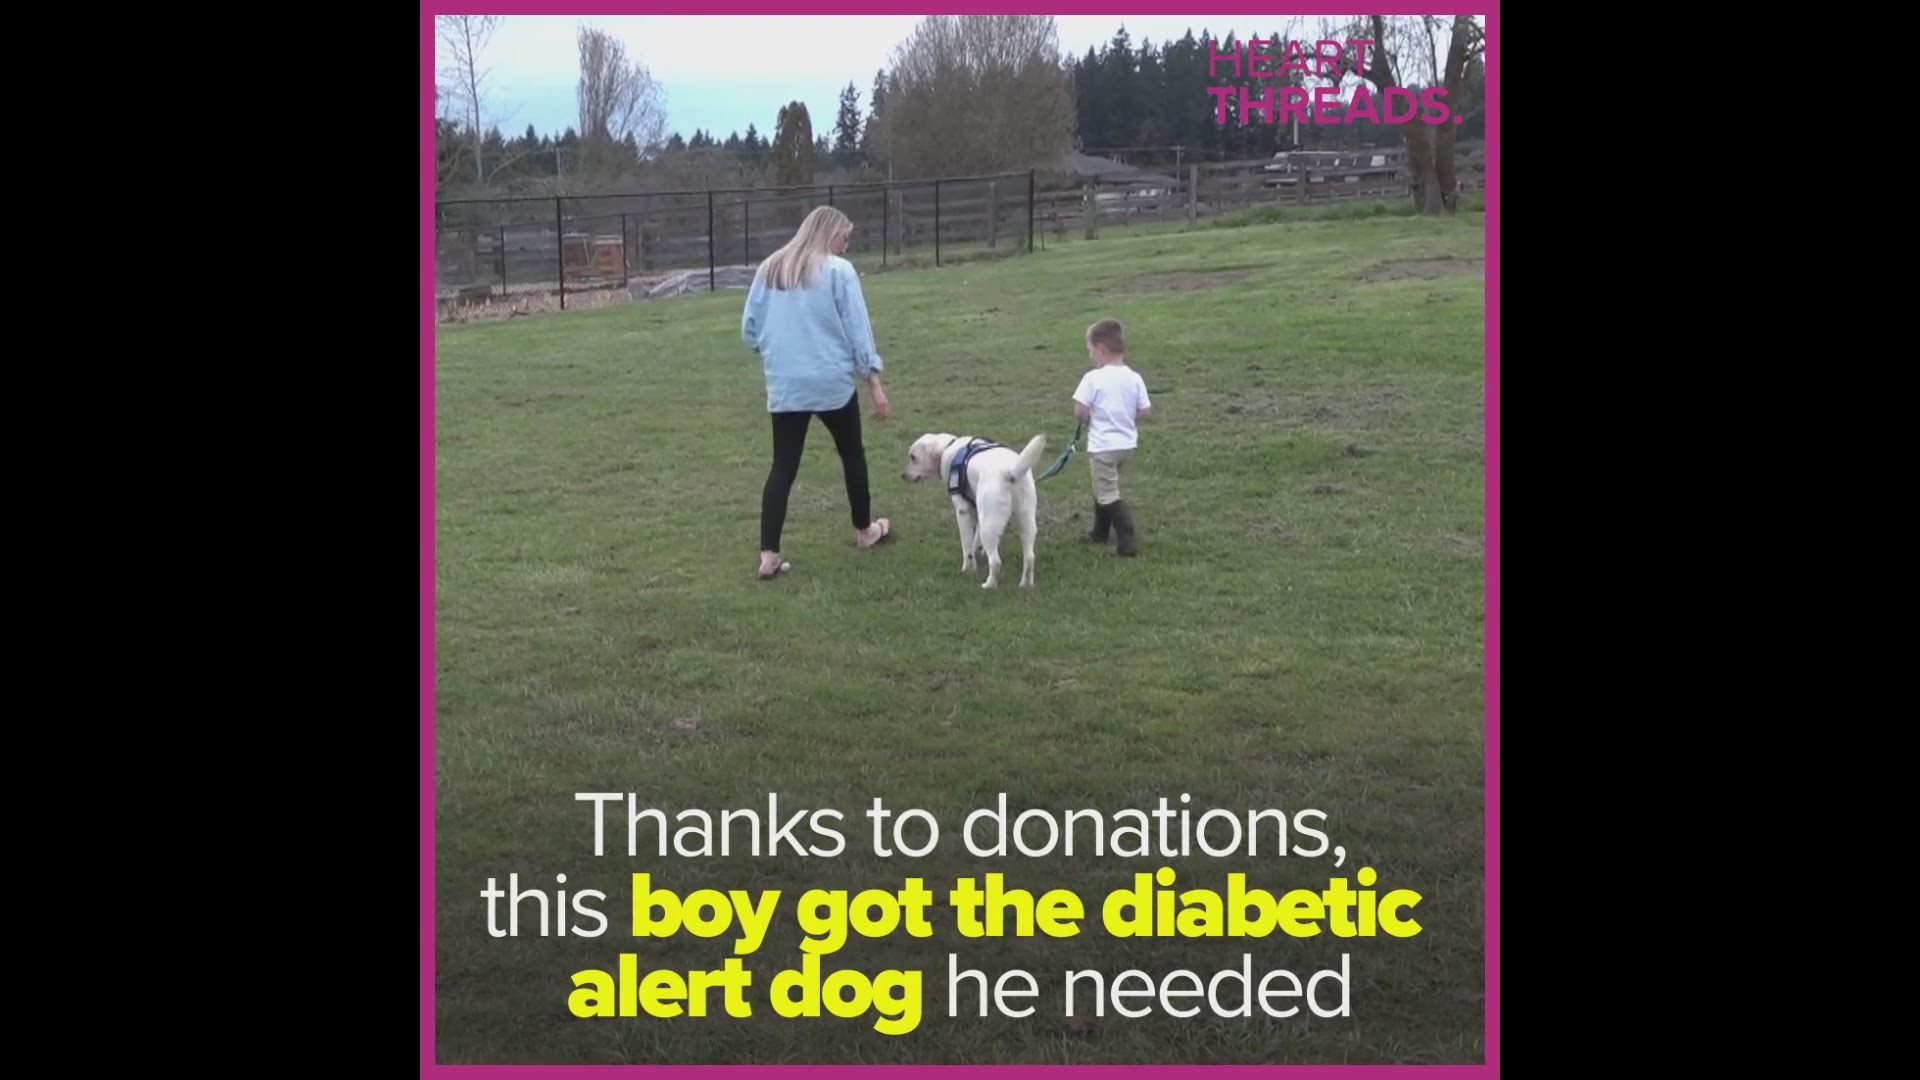 A little boy's community raised enough money for a diabetic alert dog to detect life-threatening changes in his blood sugar.